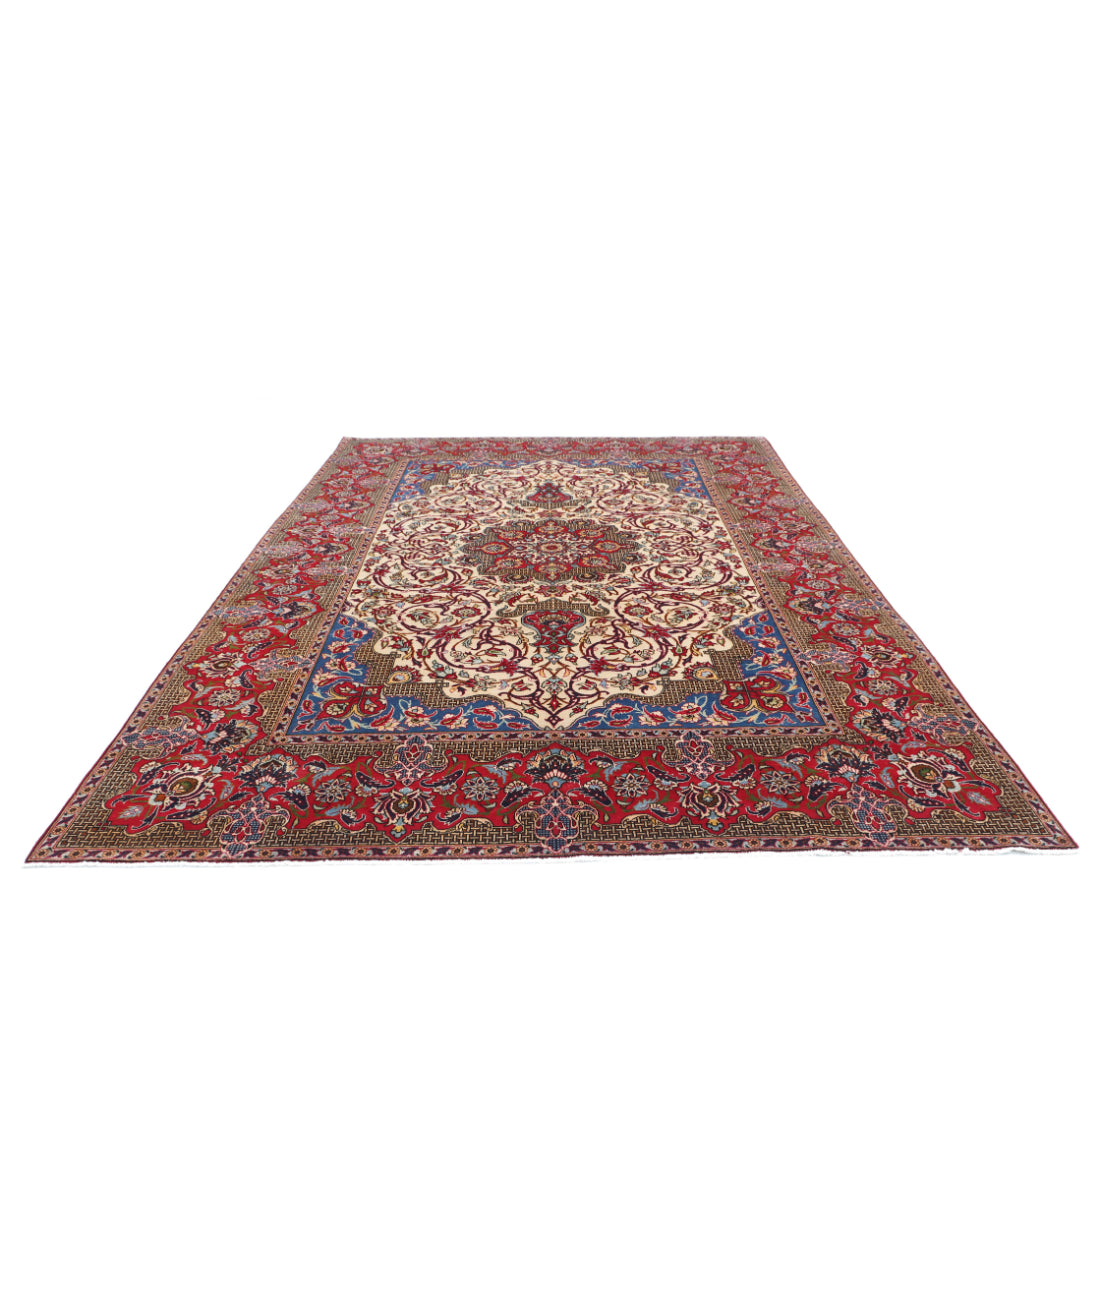 Hand Knotted Persian Tabriz Wool Rug - 8'5'' x 12'9'' 8'5'' x 12'9'' (253 X 383) / Ivory / Red